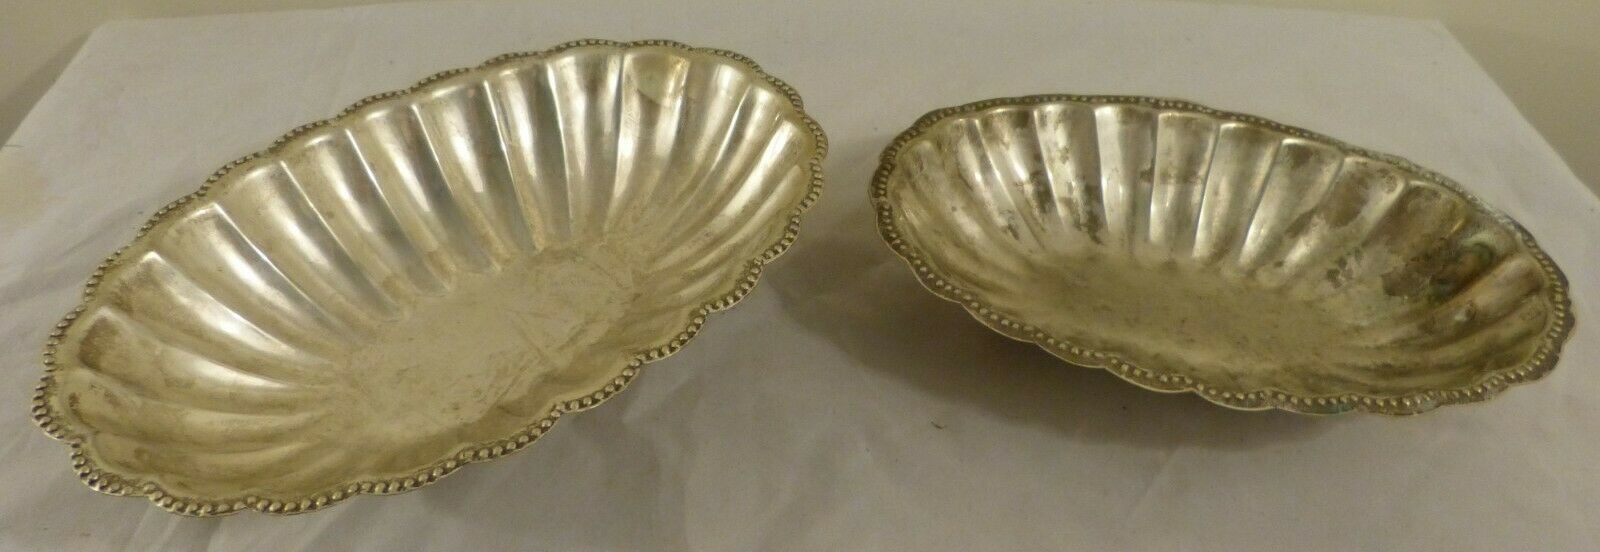 Set of 2 Vintage International Silver Co. Silver Plated Serving Trays